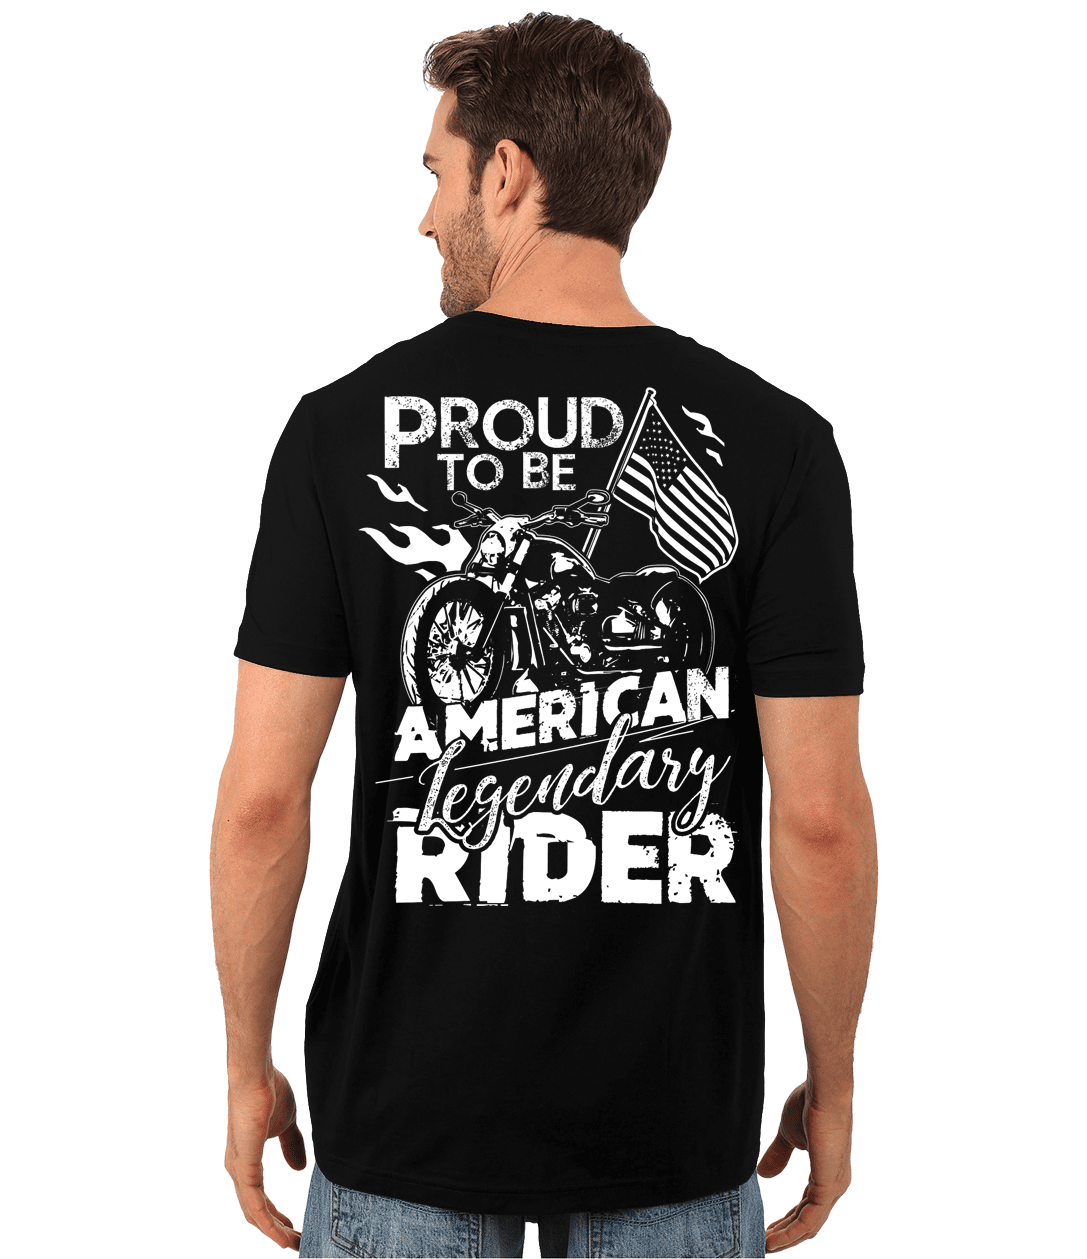 Proud to be American Legendary Rider T-Shirt - American Legend Rider